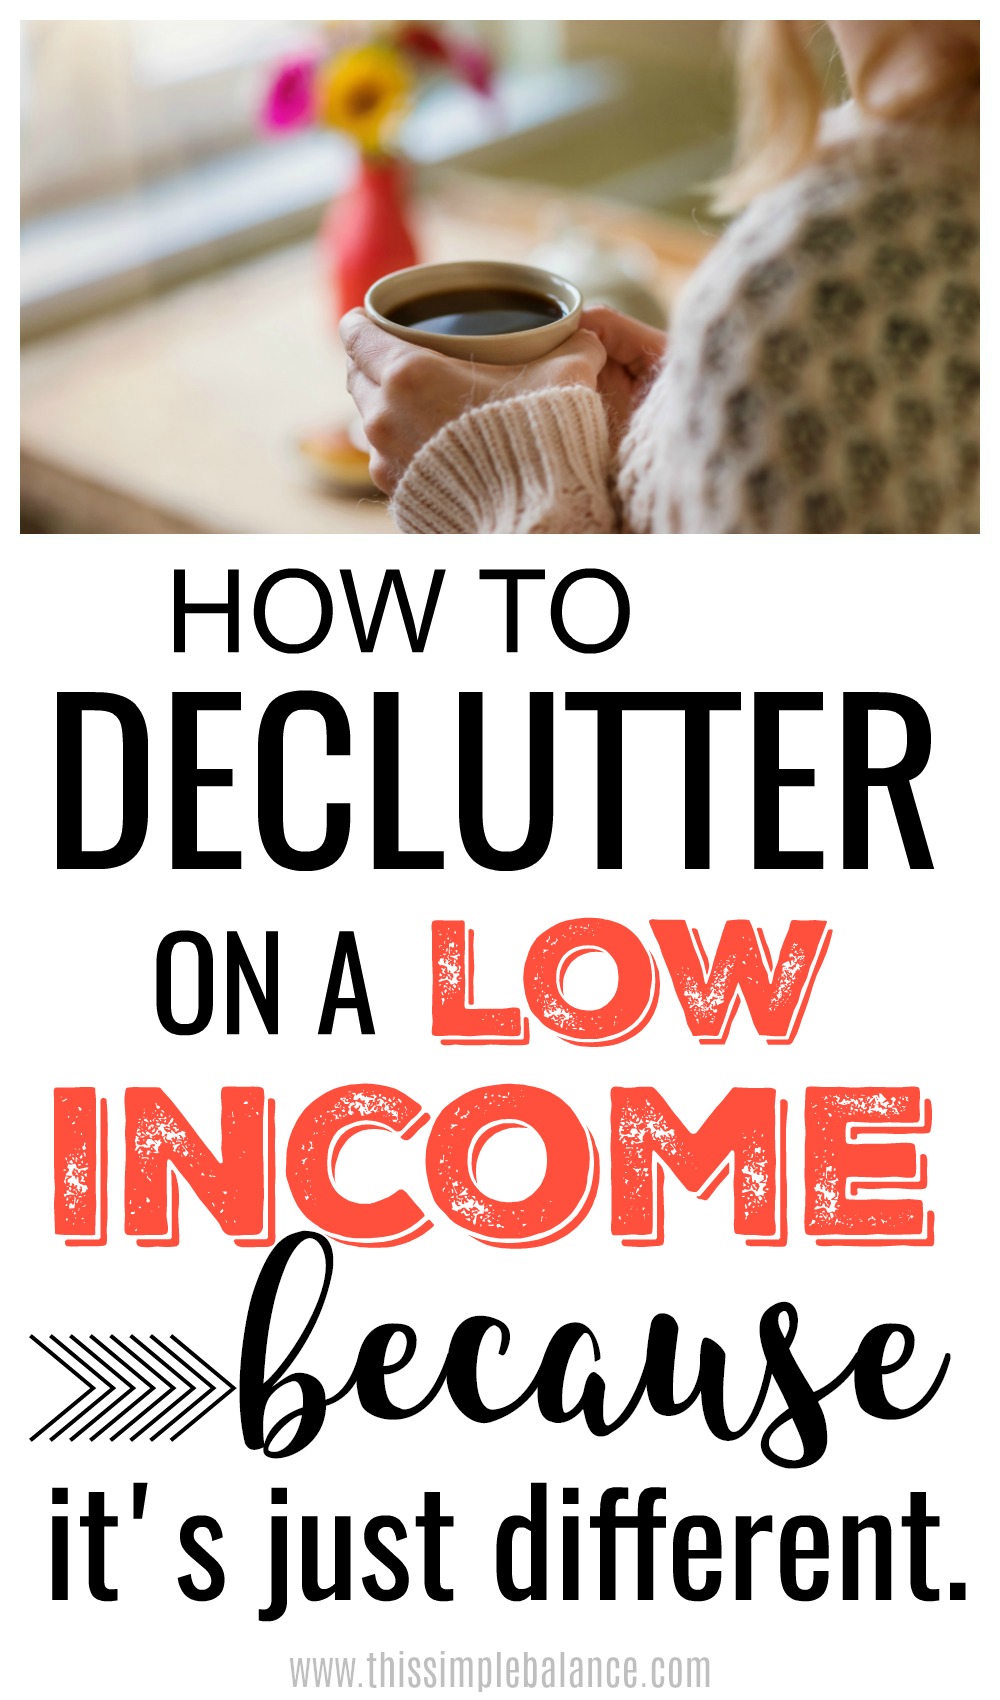 hands holding cup of coffee, with text overlay, "how to declutter on a low income because it's just different"